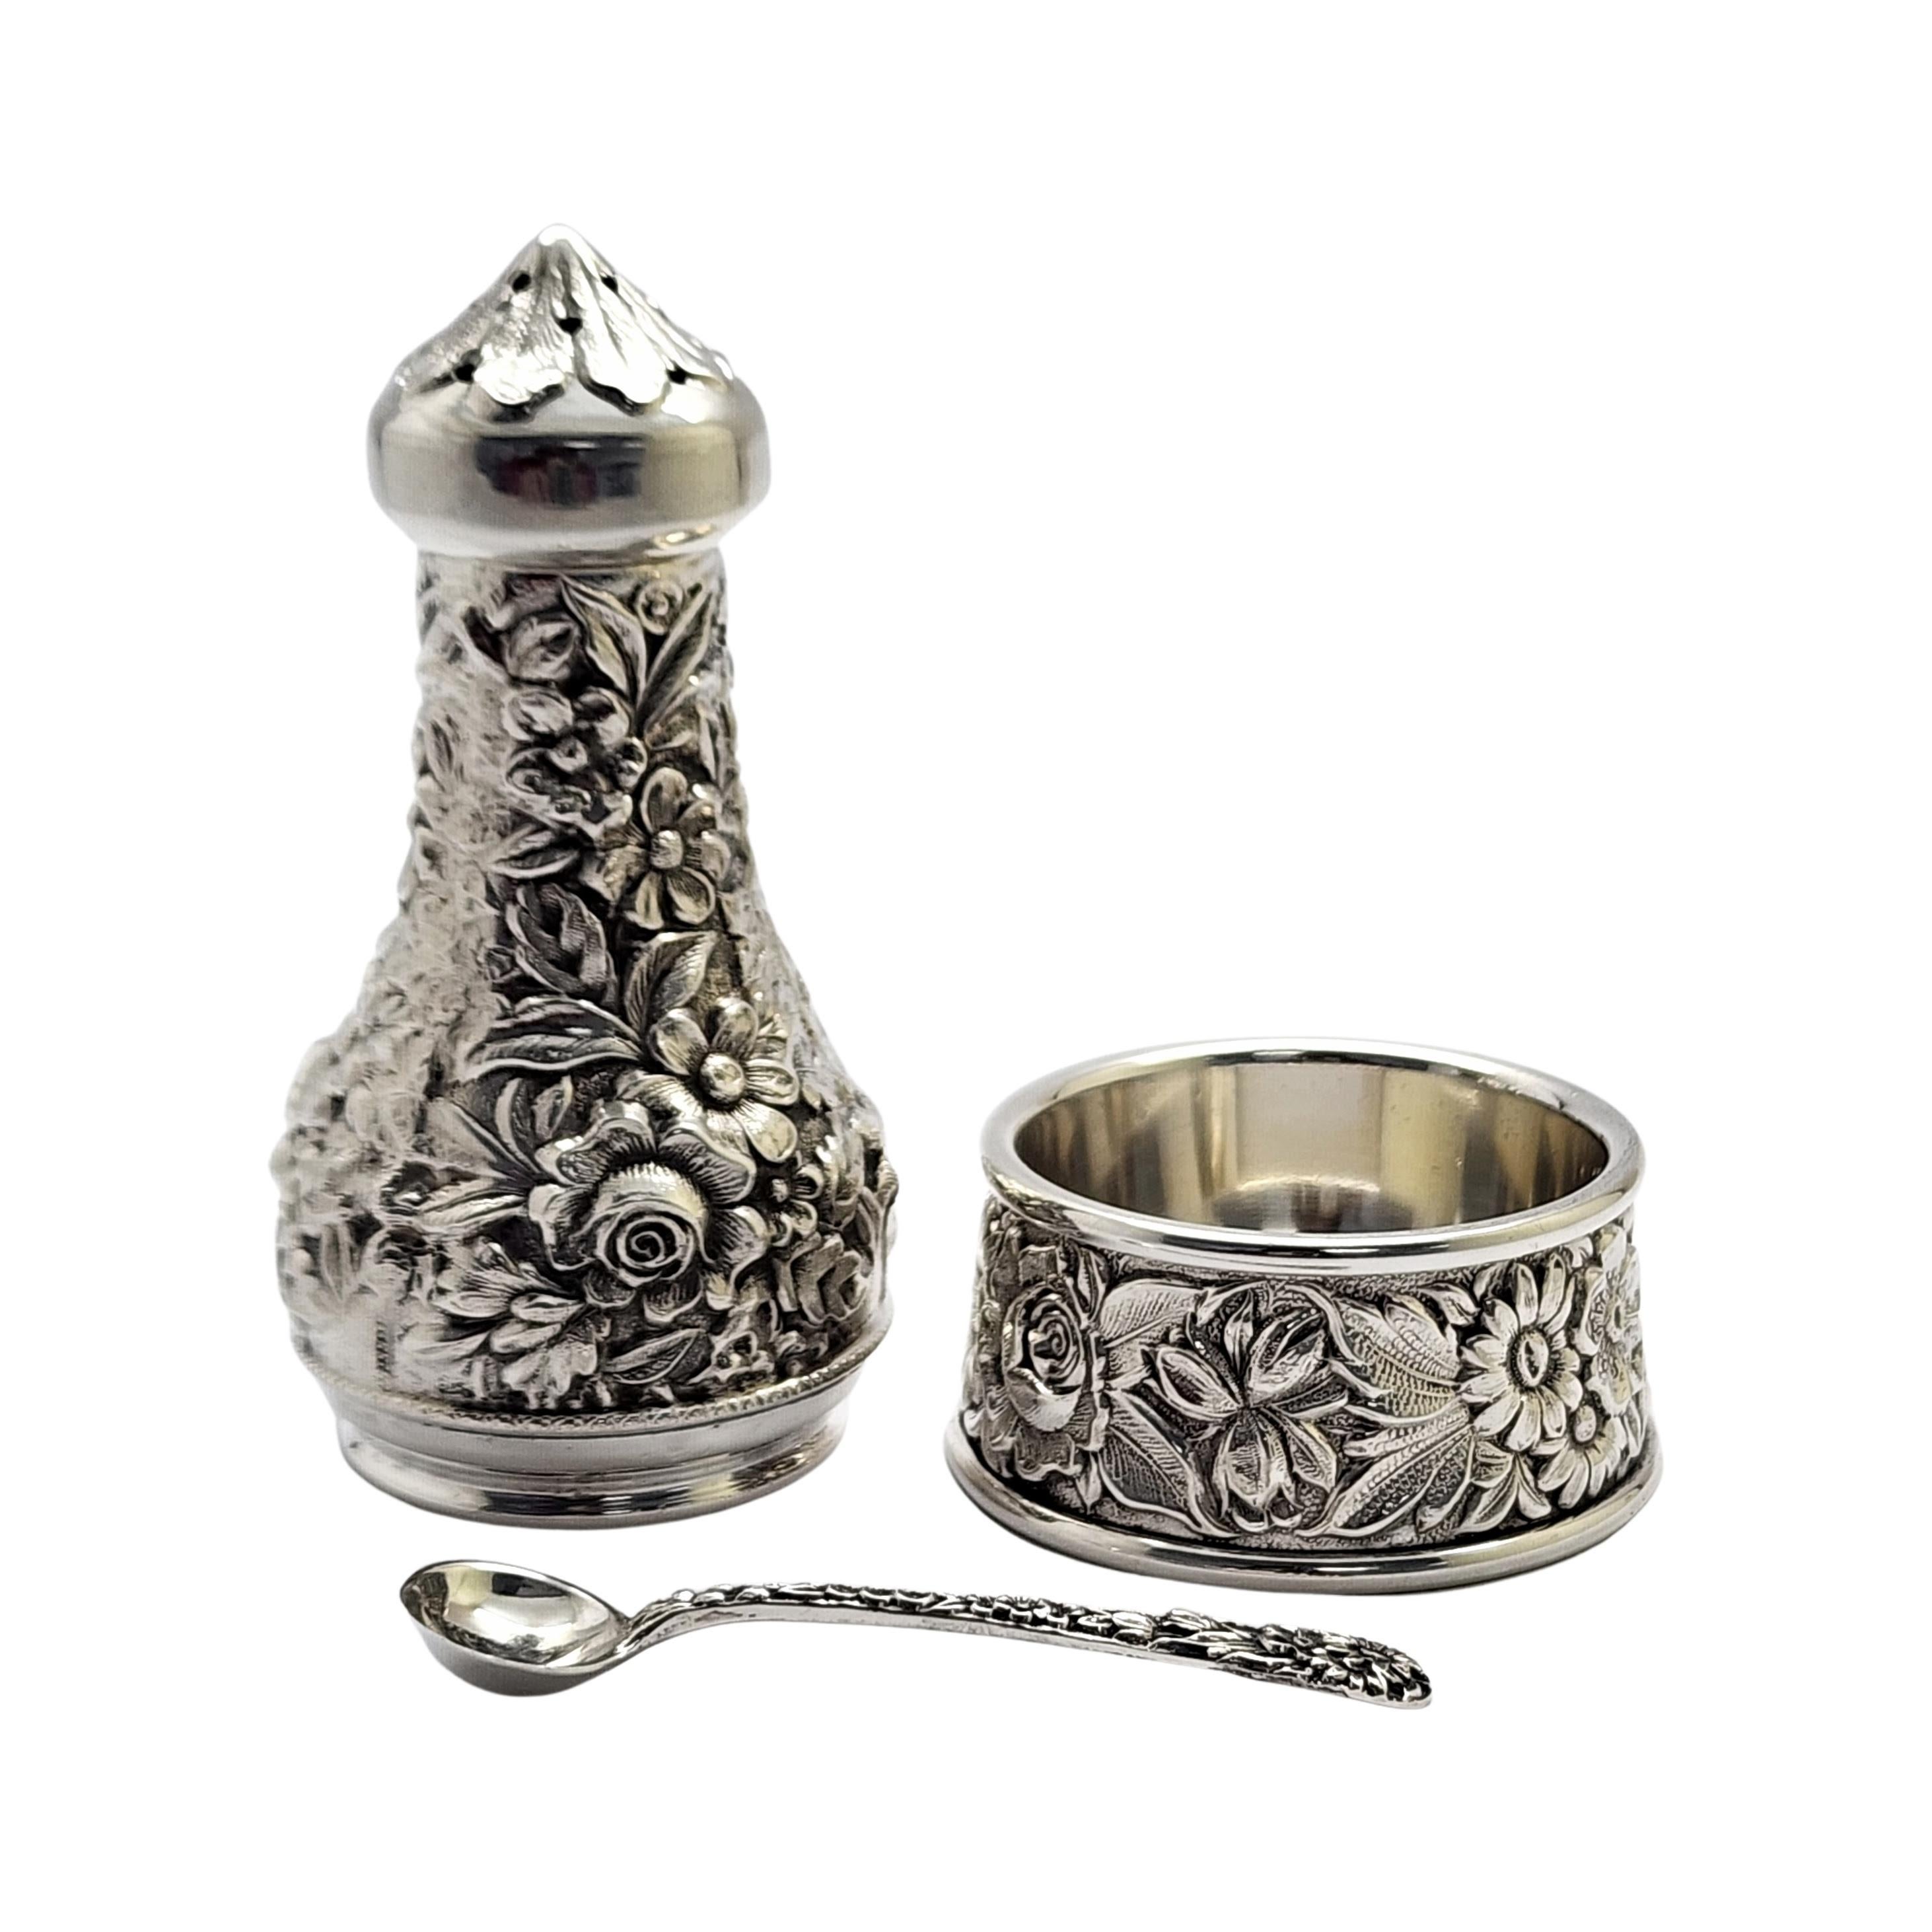 Sterling silver 3 piece set salt cellar, spoon and pepper shaker by S. Kirk and Son, pattern #59A.

All 3 pieces feature a beautiful repousse design with highly detailed flowers and leaves.

The shaker measures approx 3 1/4